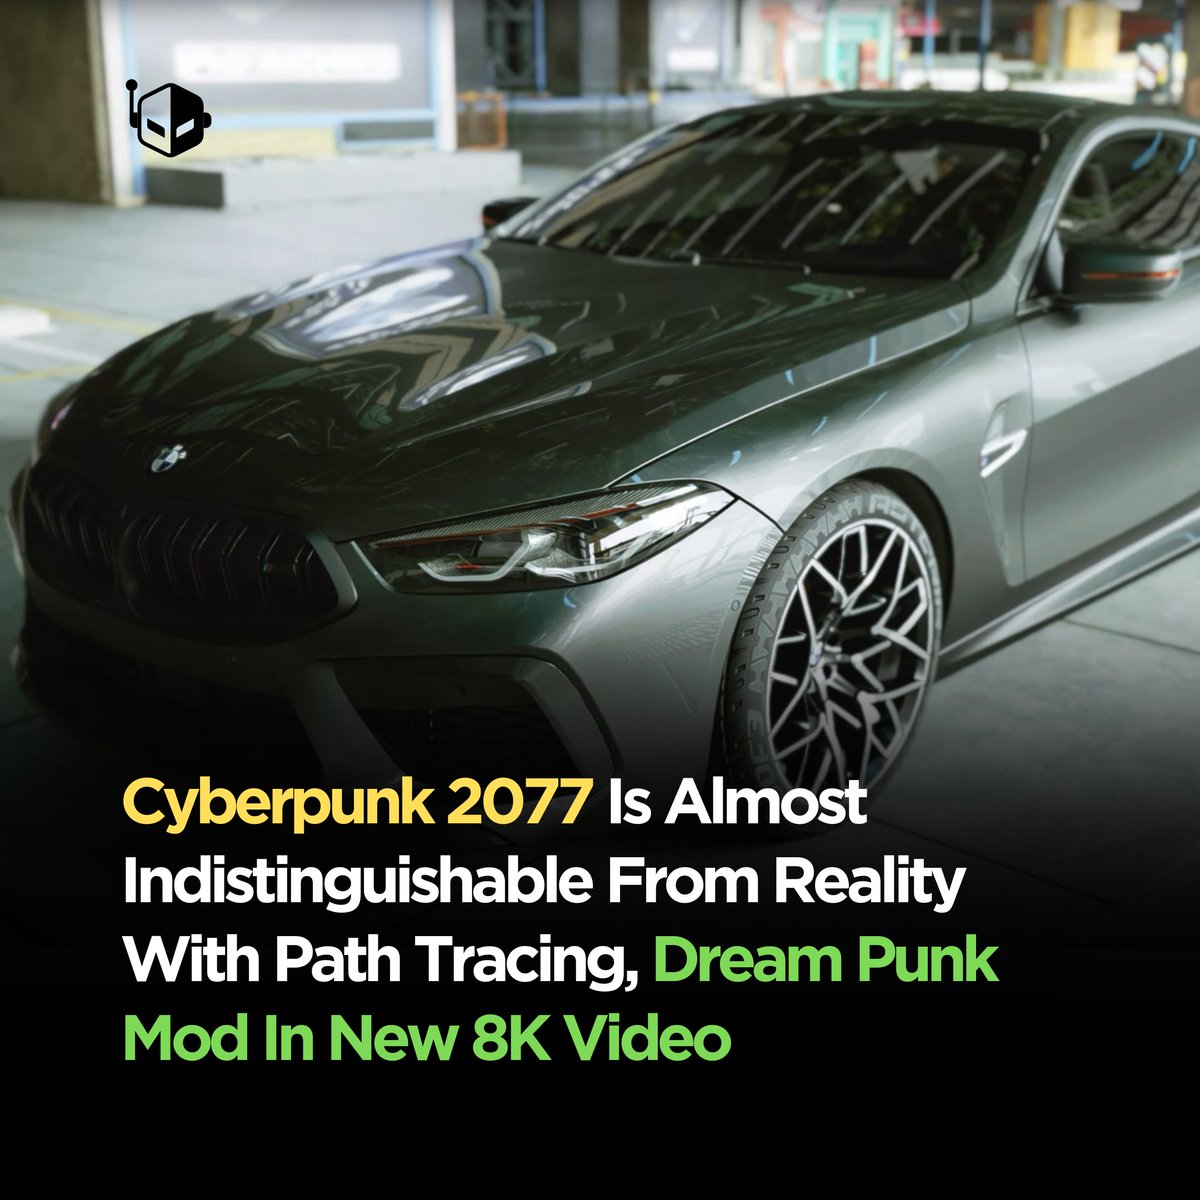 Modders enhance Cyberpunk 2077's visuals with DreamPunk 1.0 mod, showcasing near-reality graphics in new 8K video.